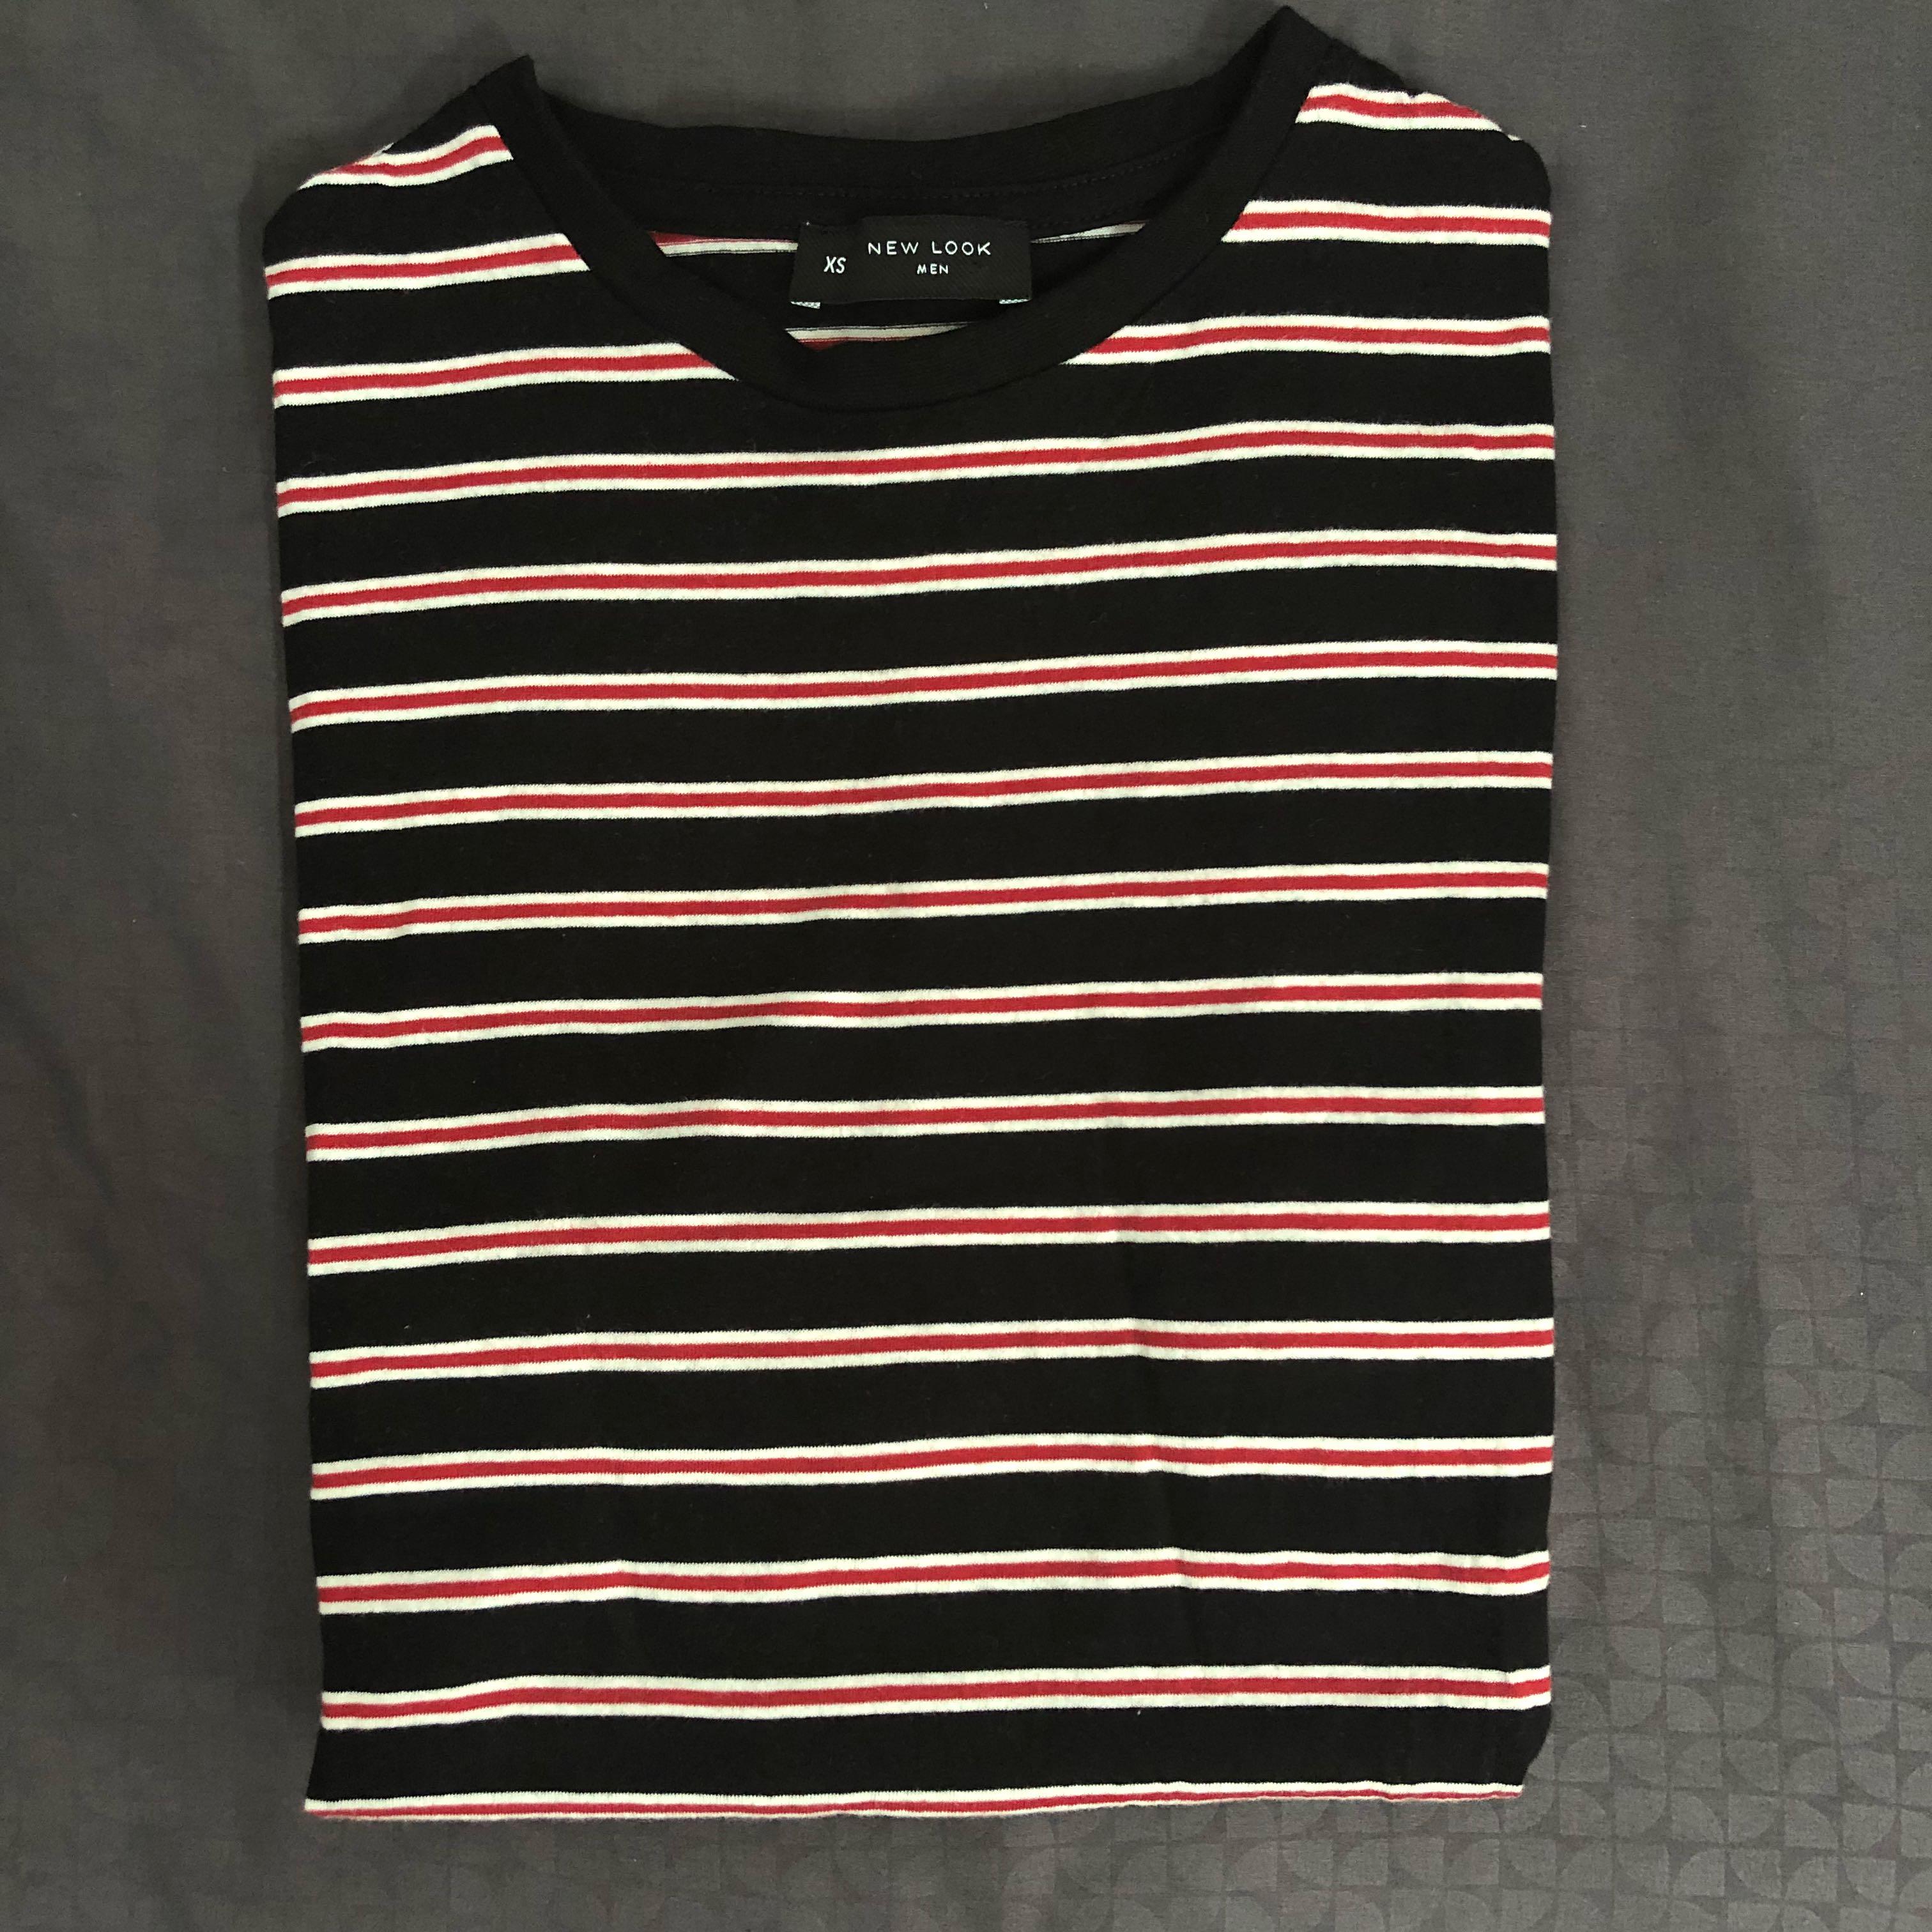 red black and white striped shirt